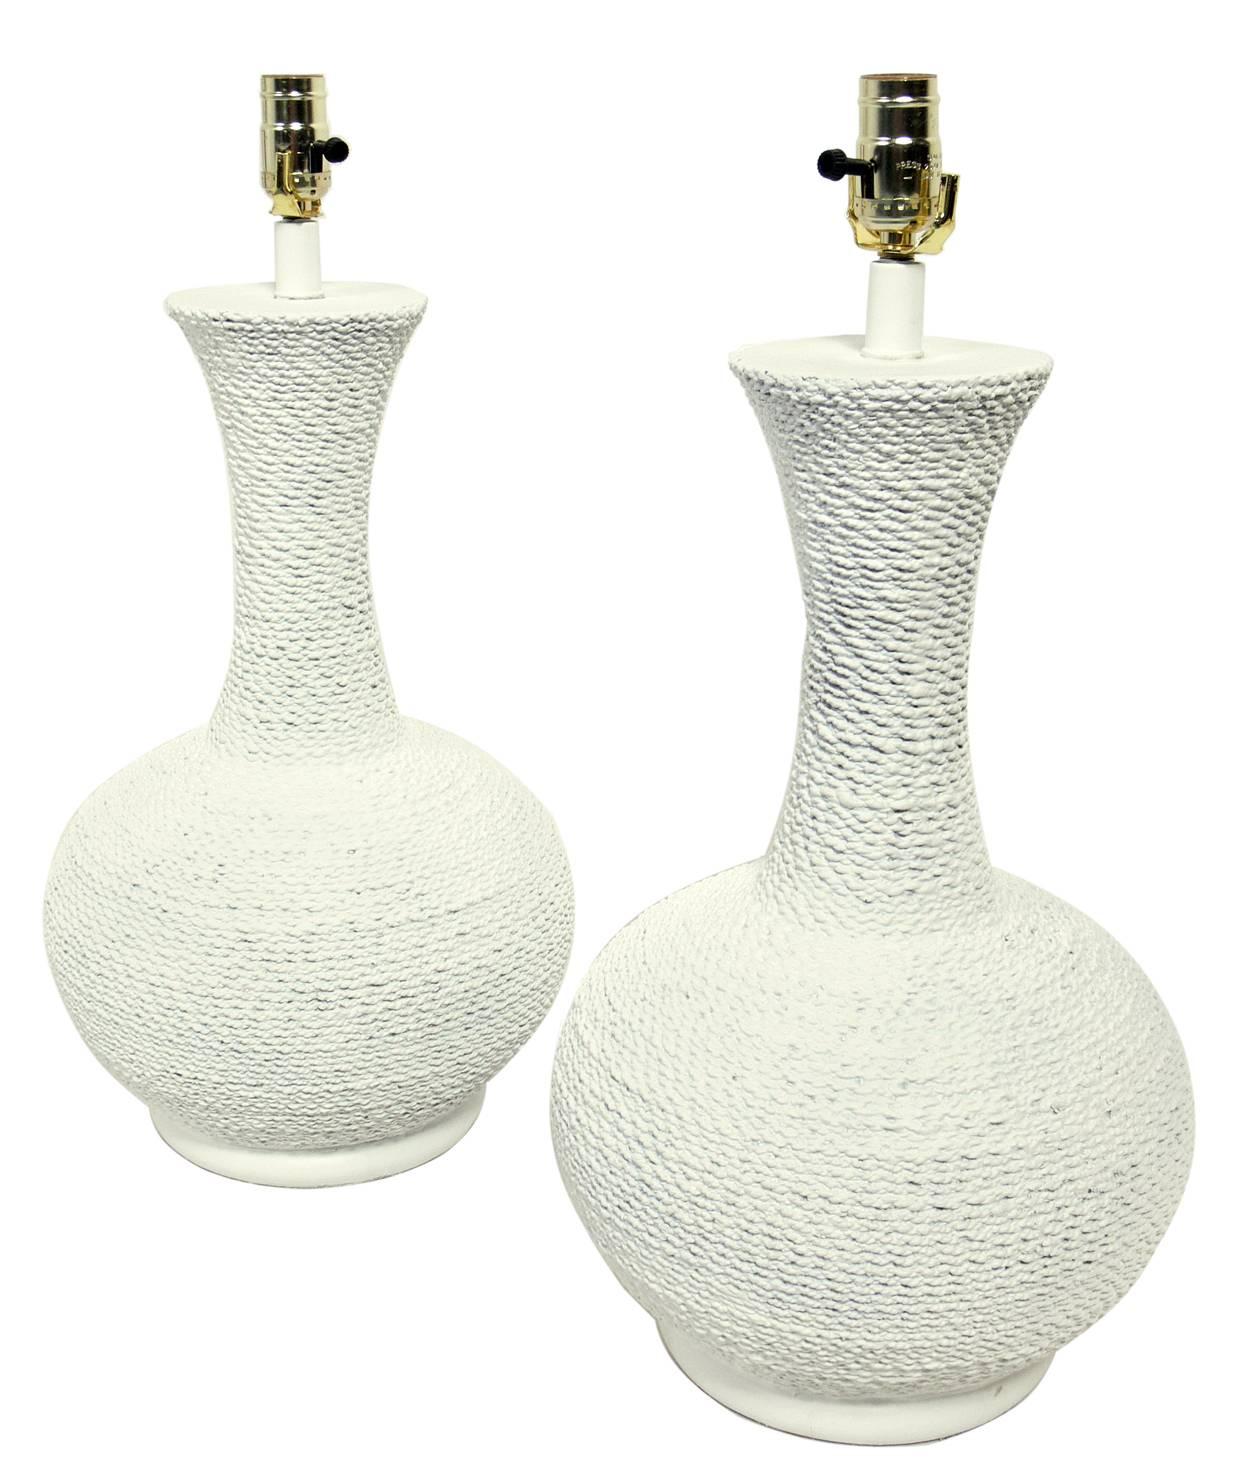 Pair of coiled rope plaster lamps, American, circa 1980s. They have a very nautical feel and a chalky white color finish. Rewired and ready to use.